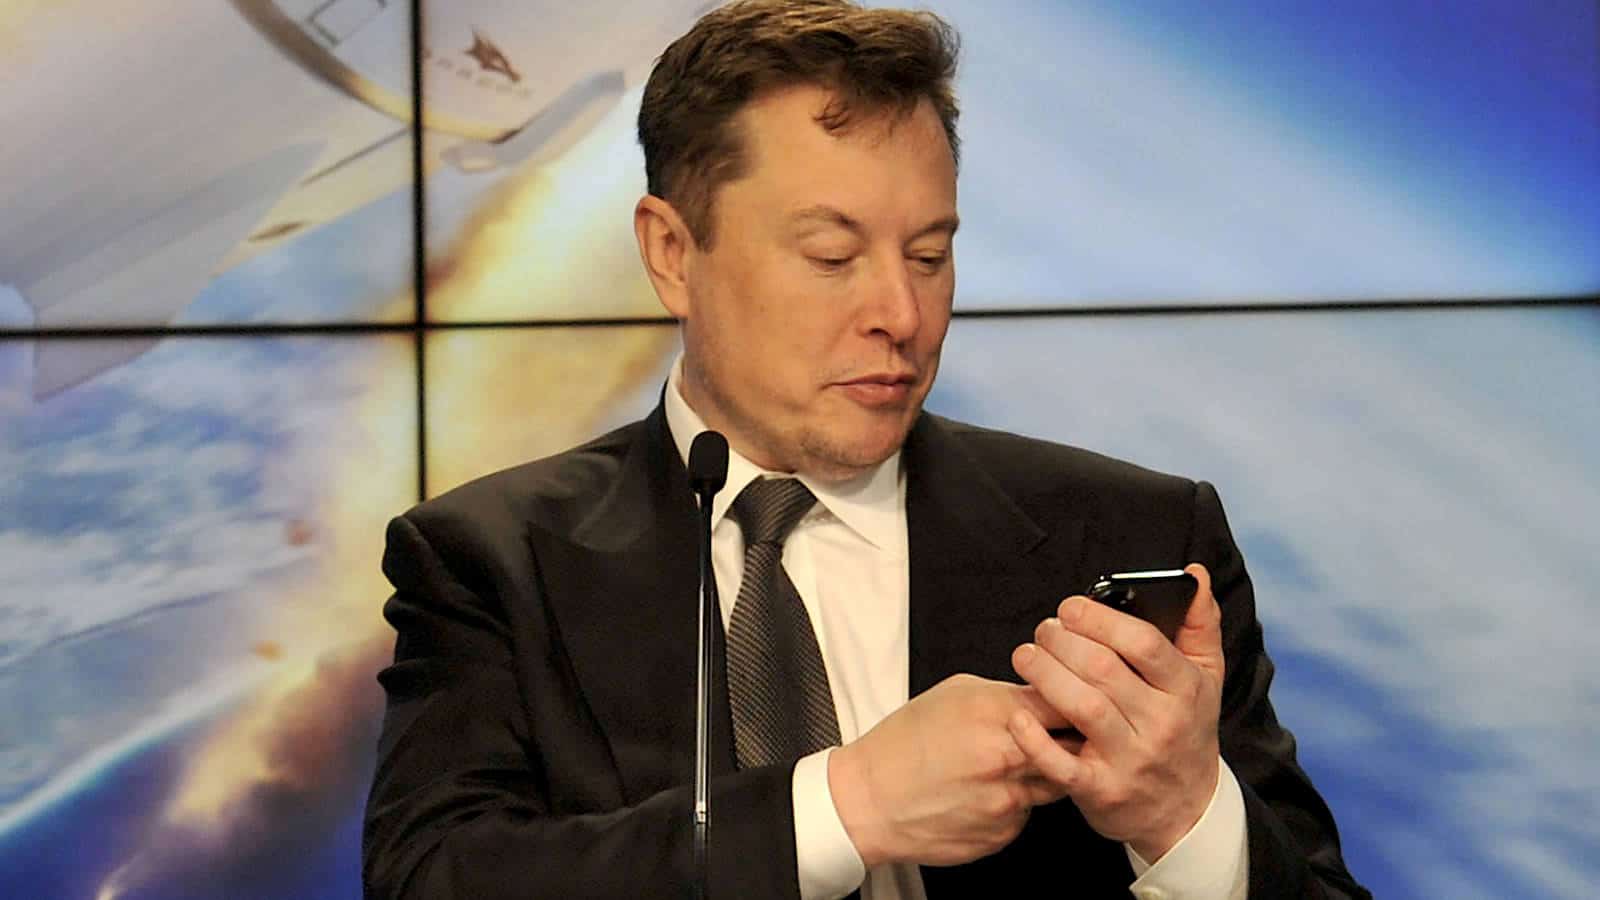 Woman With Elon Musk's Phone Number Gets Strange Text Messages